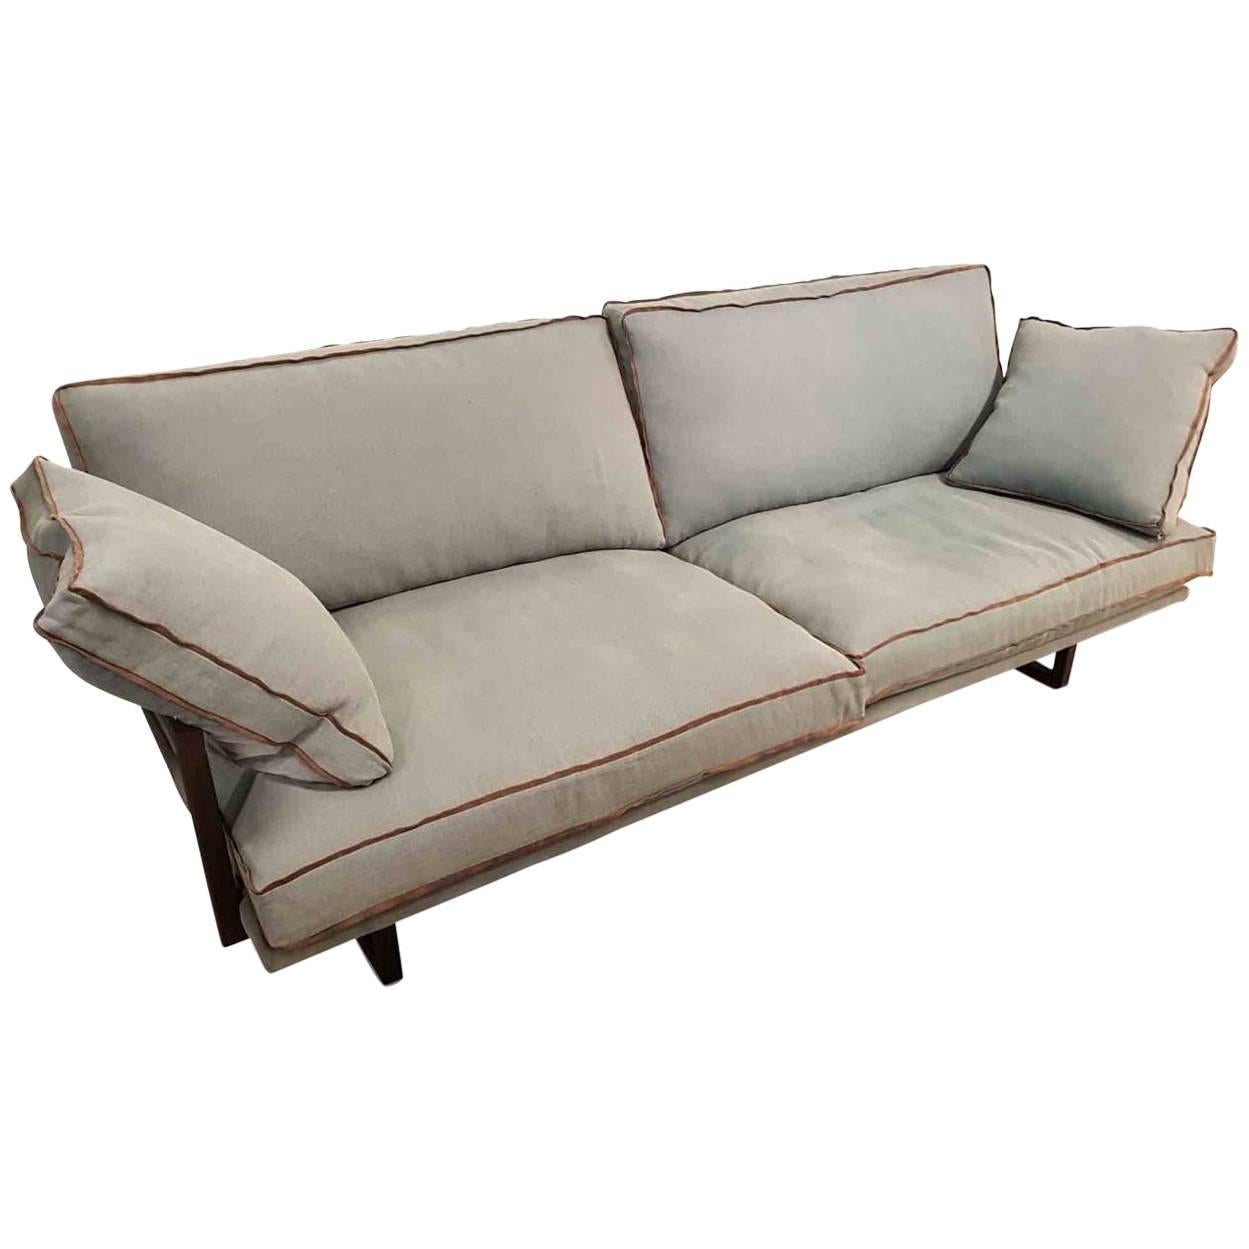 Sofa Safari GP01 by Manufacturer Ghyczy Finished in Fabric and Stainless Steel For Sale